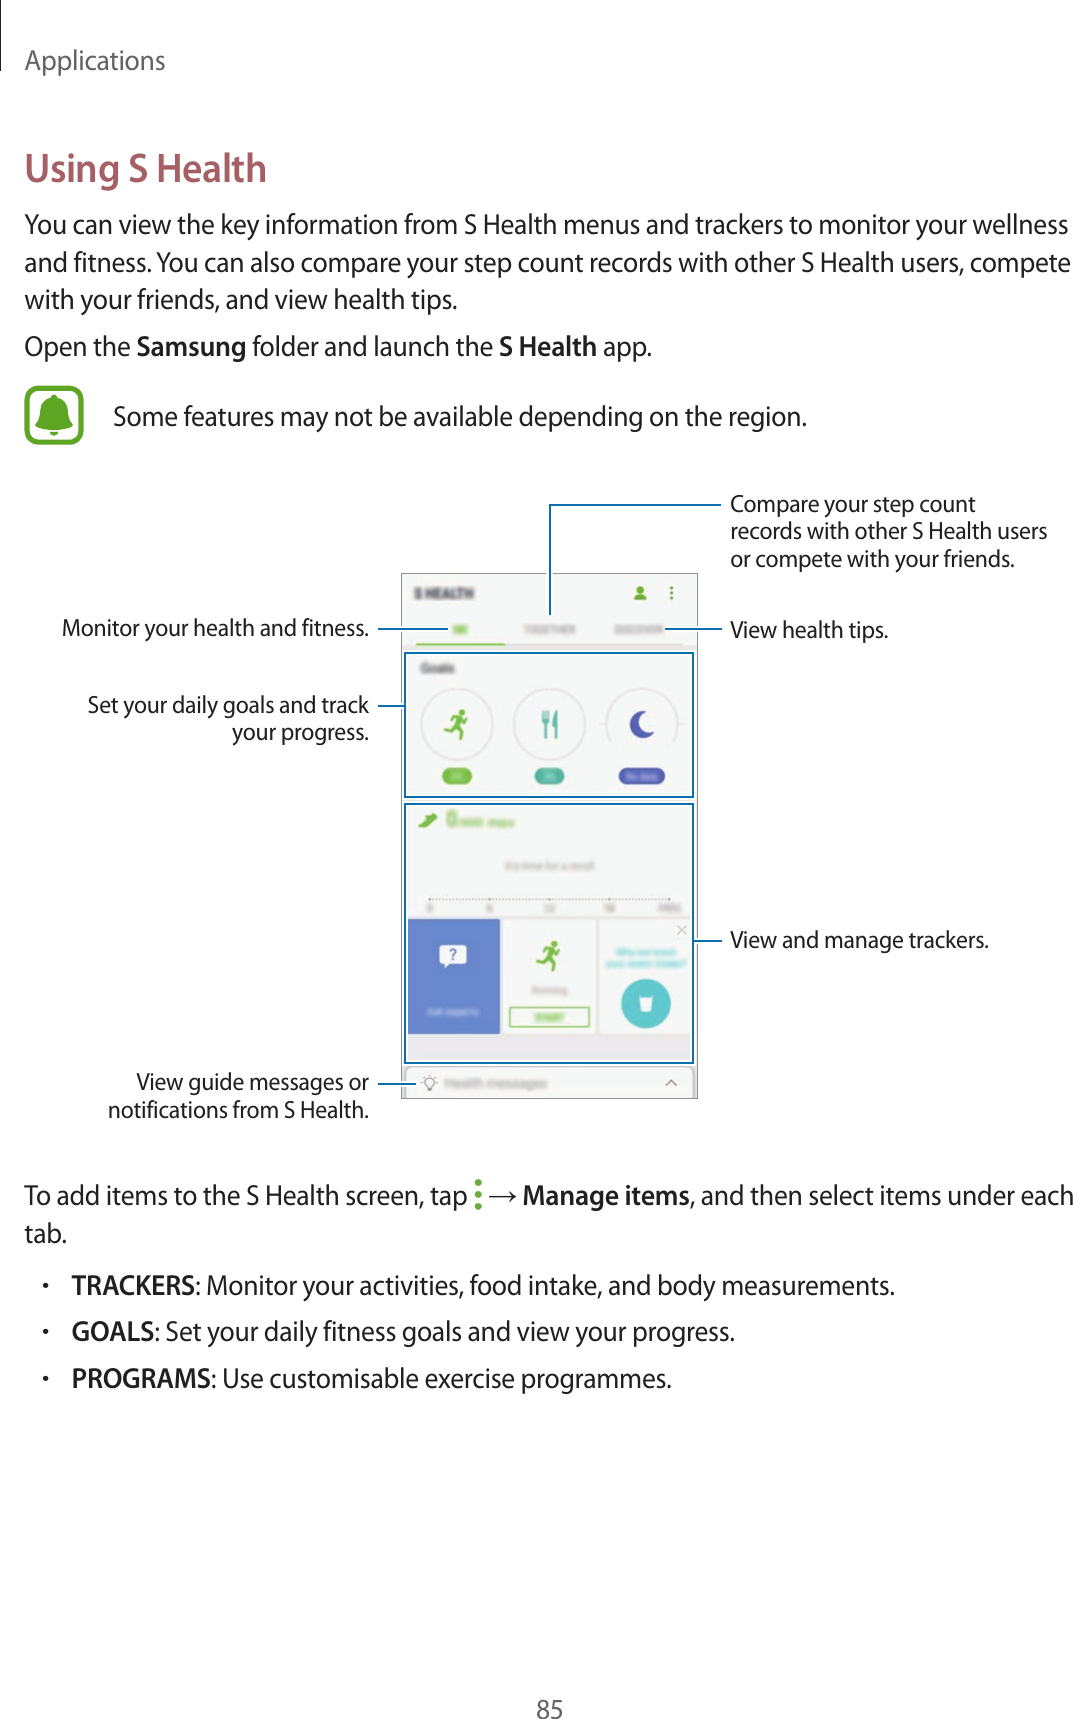 Applications85Using S HealthYou can view the key information from S Health menus and trackers to monitor your wellness and fitness. You can also compare your step count records with other S Health users, compete with your friends, and view health tips.Open the Samsung folder and launch the S Health app.Some features may not be available depending on the region.View and manage trackers.View health tips.Compare your step count records with other S Health users or compete with your friends.Set your daily goals and track your progress.Monitor your health and fitness.View guide messages or notifications from S Health.To add items to the S Health screen, tap   → Manage items, and then select items under each tab.•TRACKERS: Monitor your activities, food intake, and body measurements.•GOALS: Set your daily fitness goals and view your progress.•PROGRAMS: Use customisable exercise programmes.